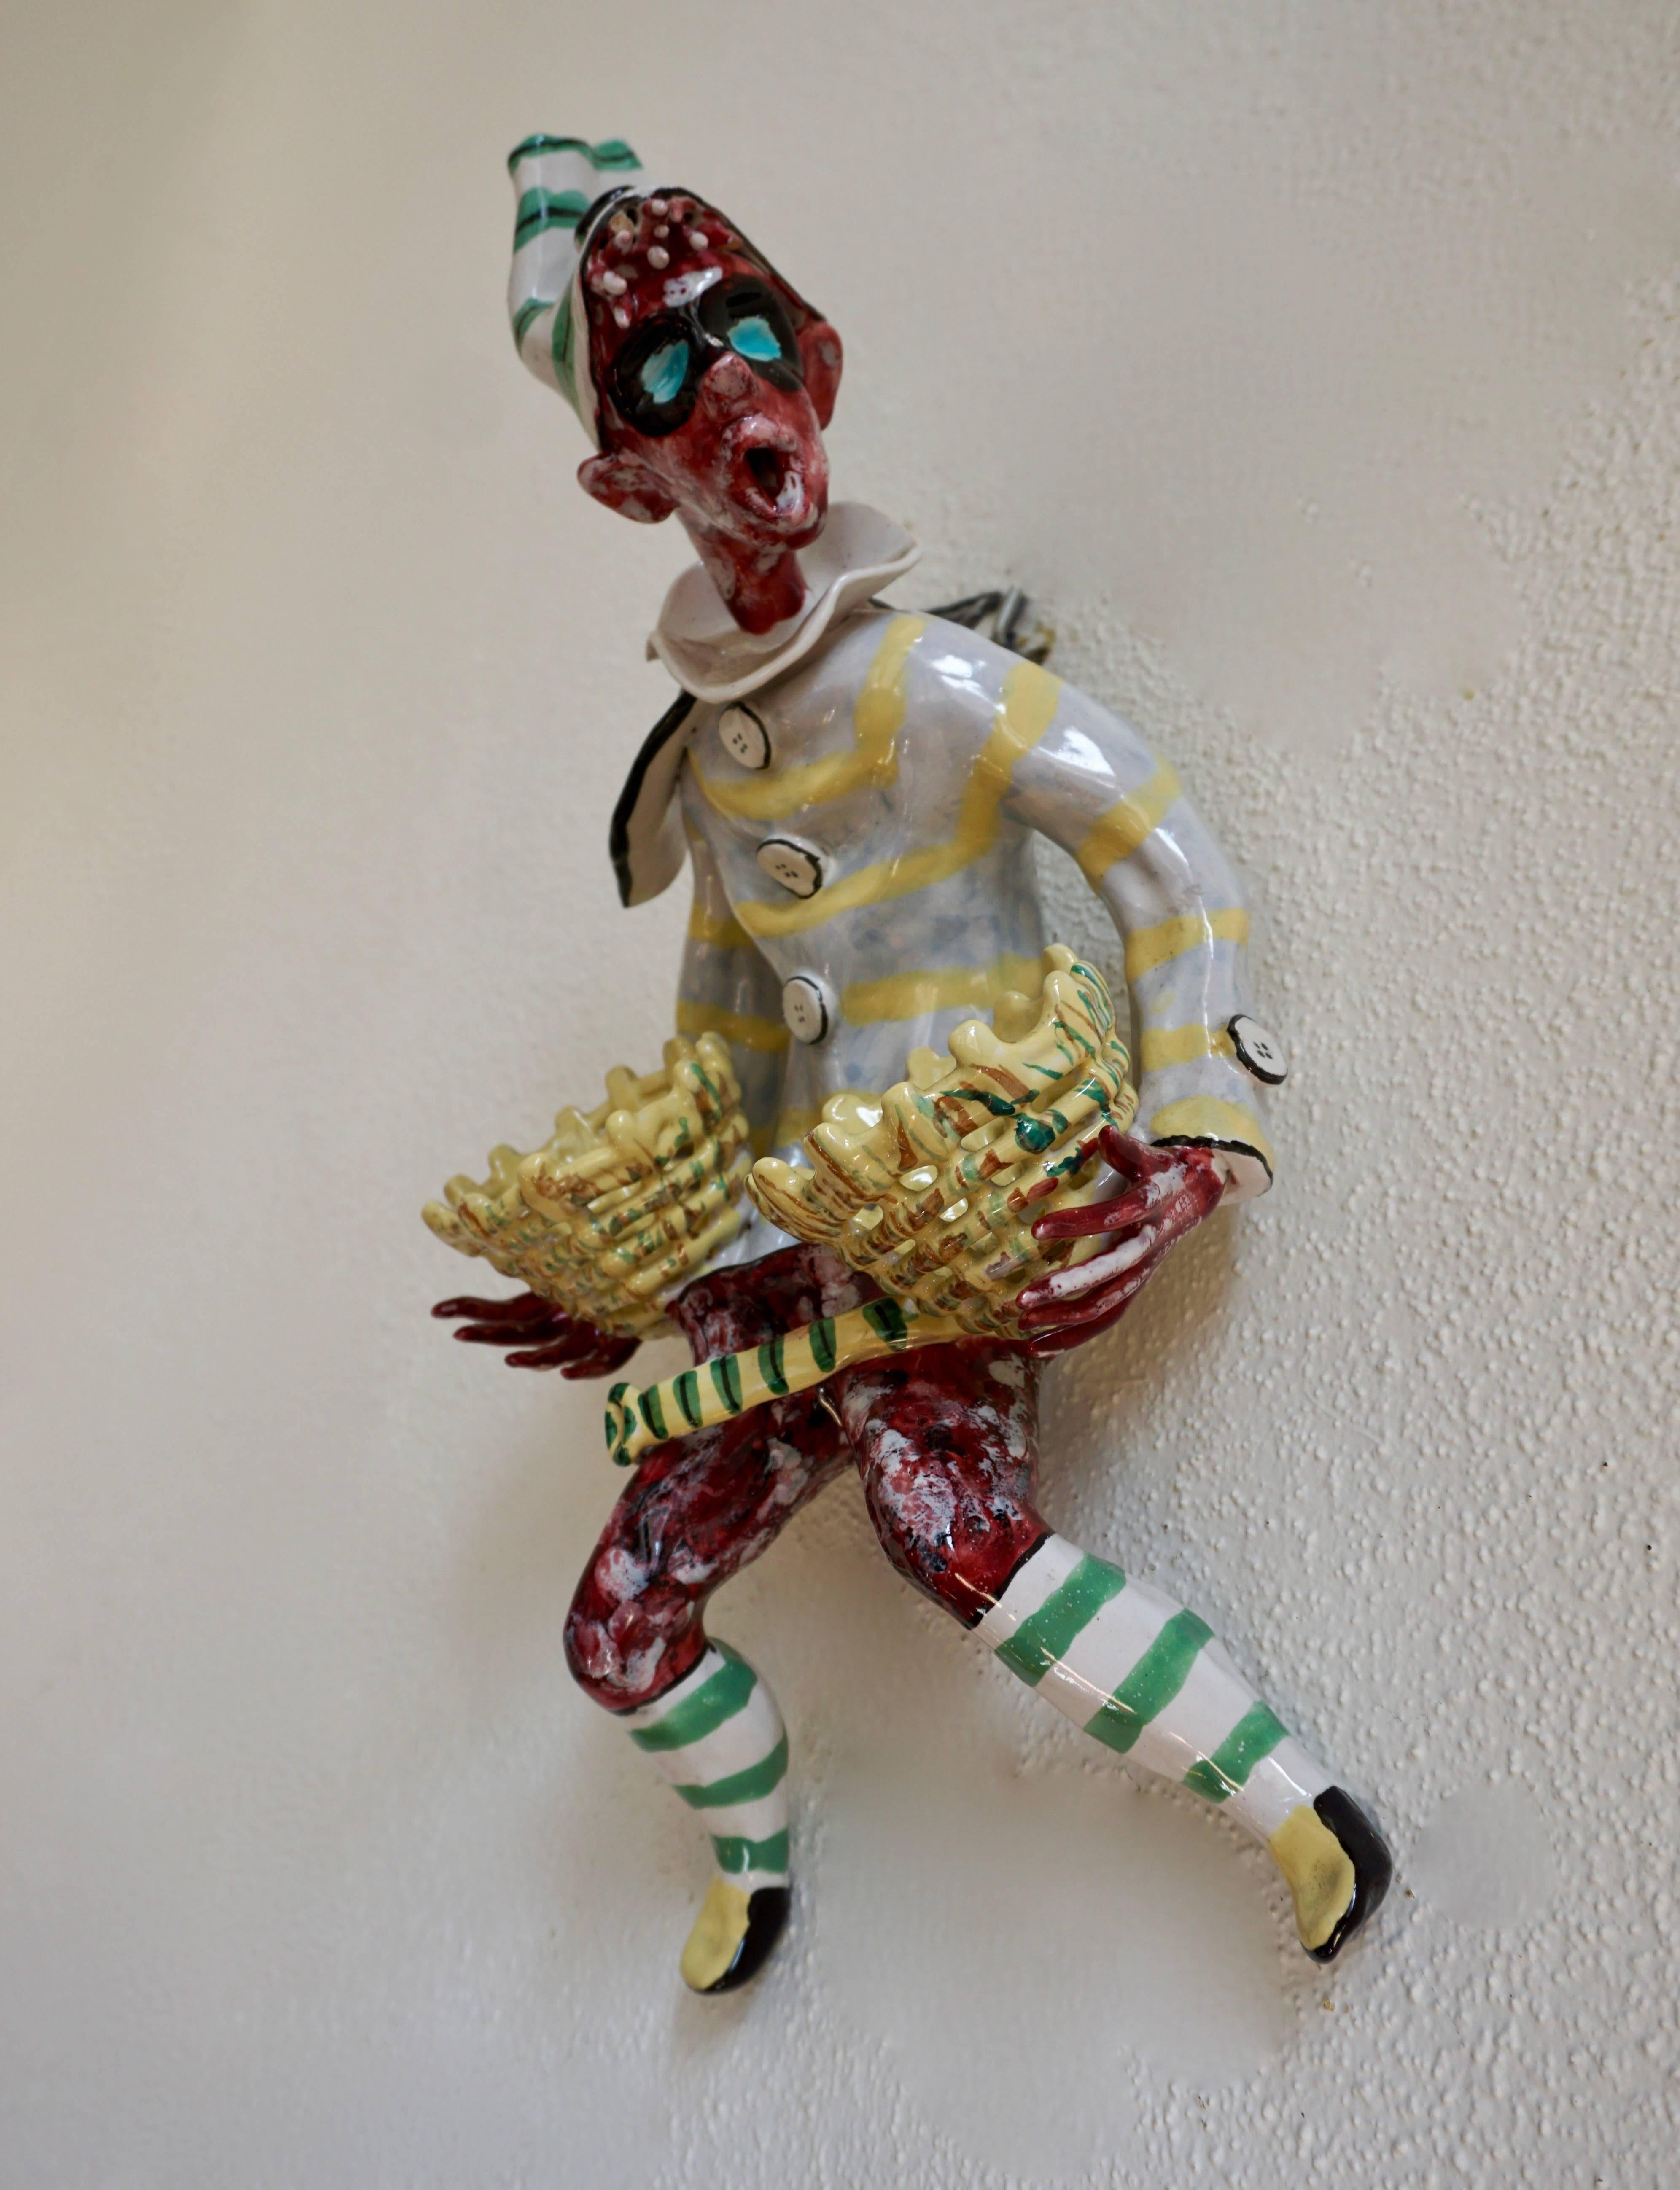 Murano ceramic hand-painted wall sculpture, Venezia, Italy.
Signed.
Measures: Height 47 cm.